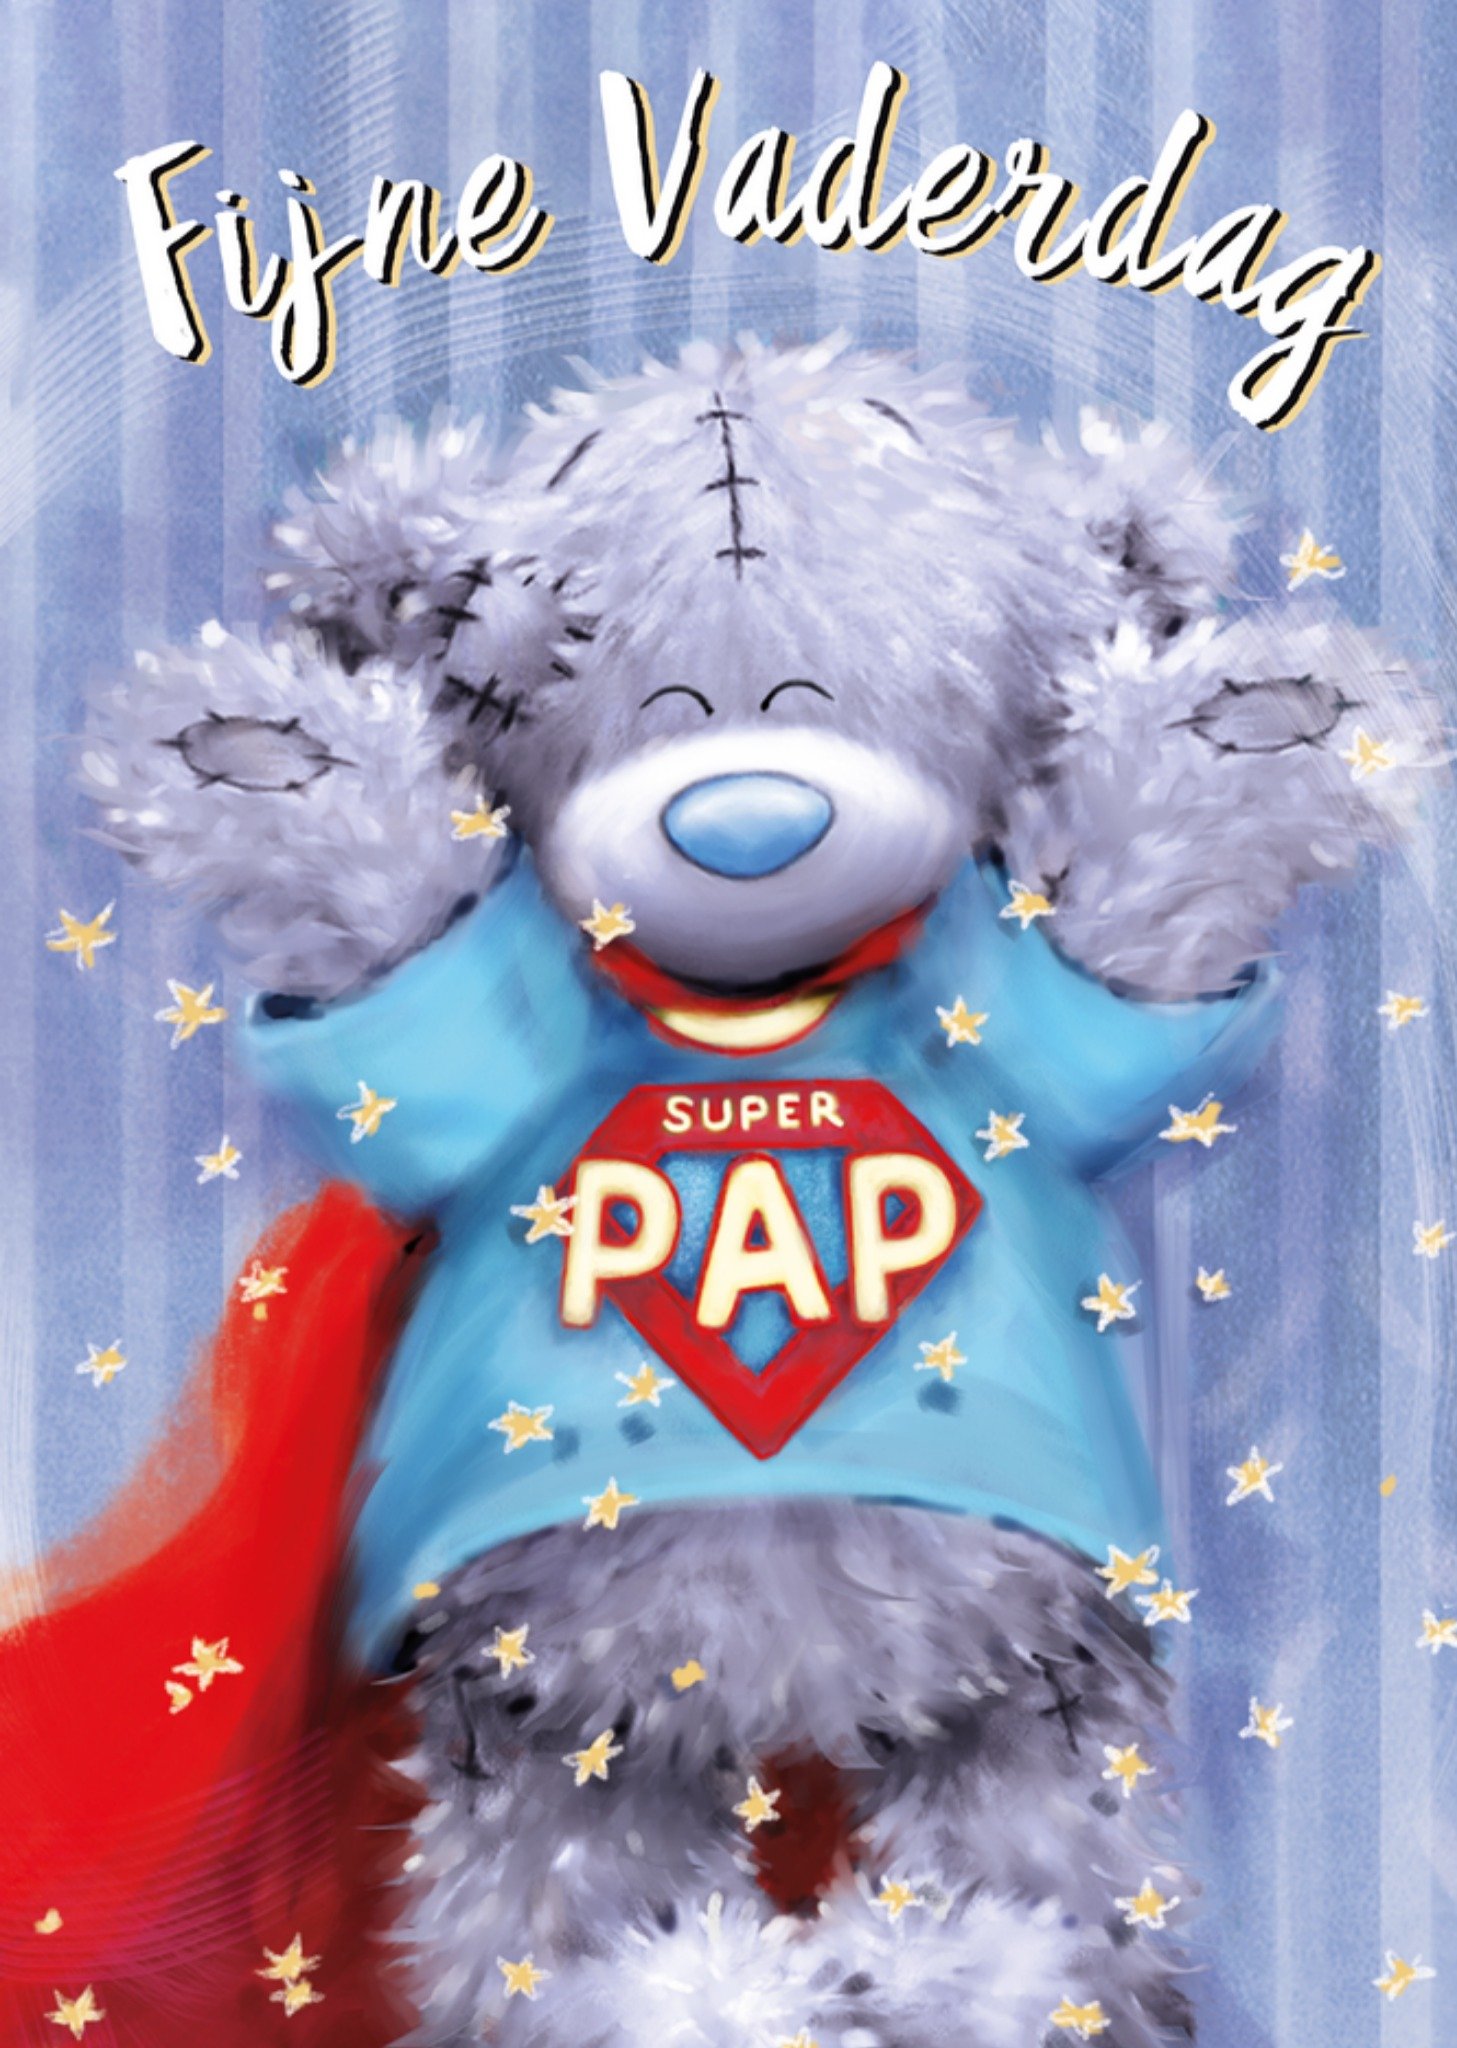 Me to You - Vaderdagkaart - Tatty Teddy - Super Pap